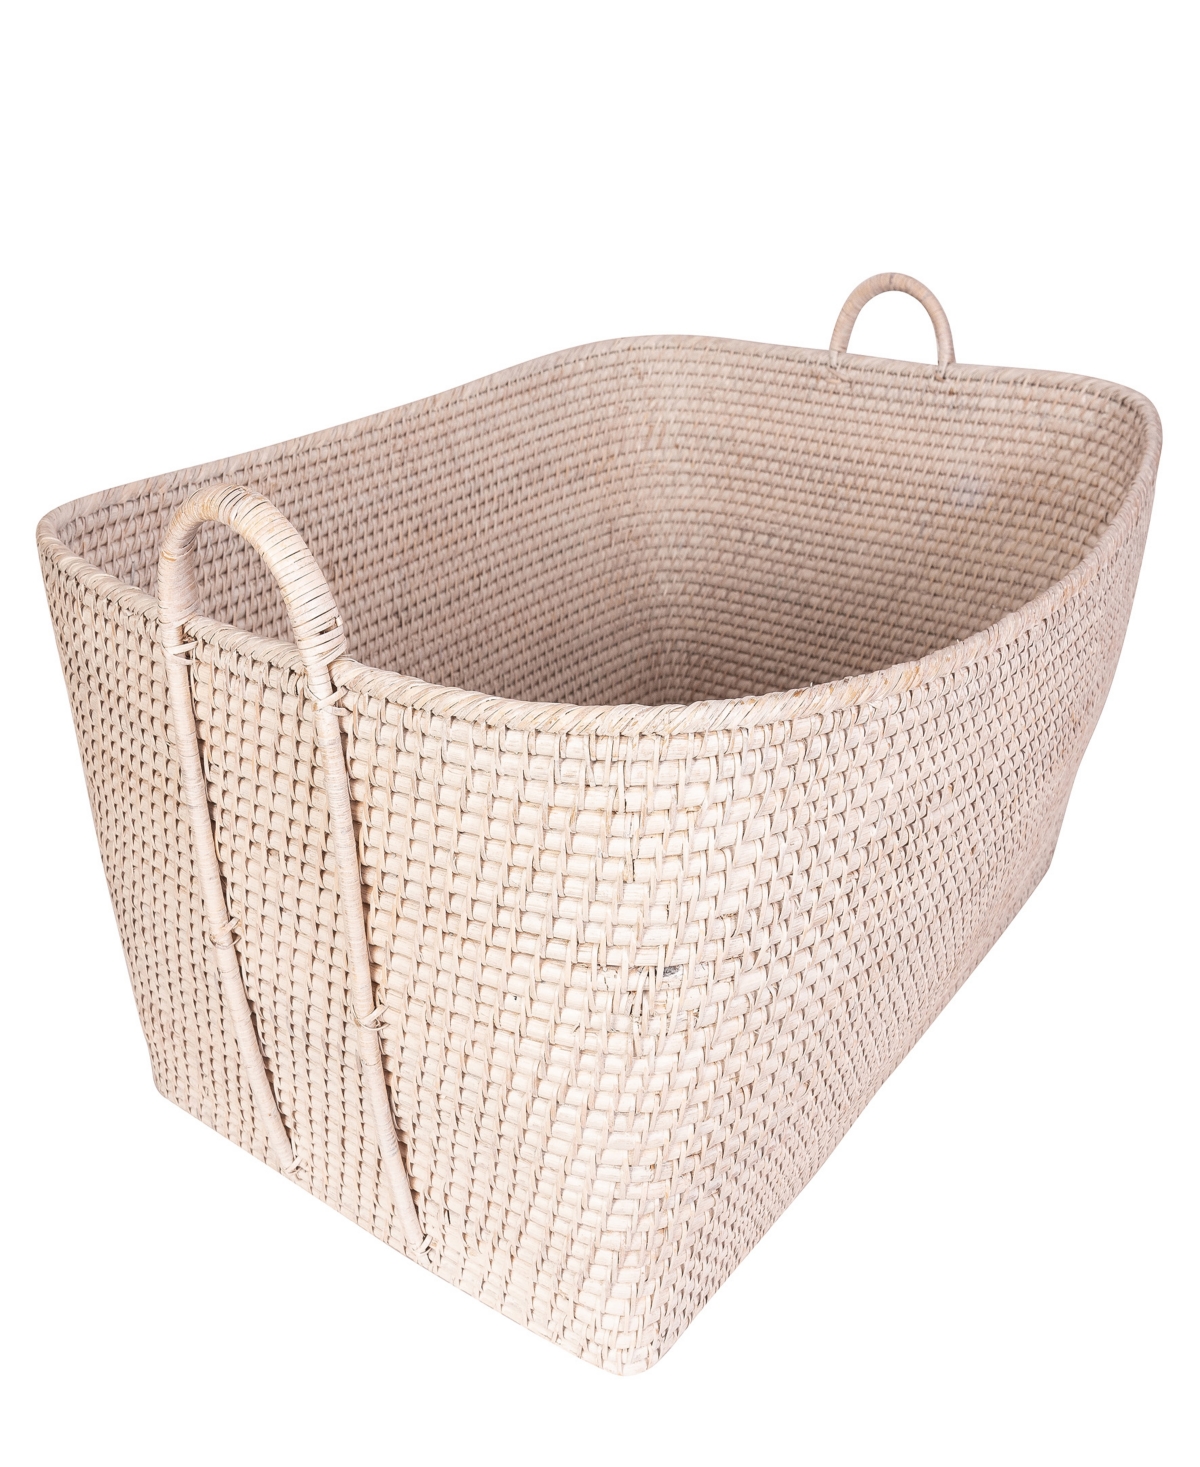 Shop Artifacts Trading Company Saboga Home Everything Basket With Hoop Handles In White Wash